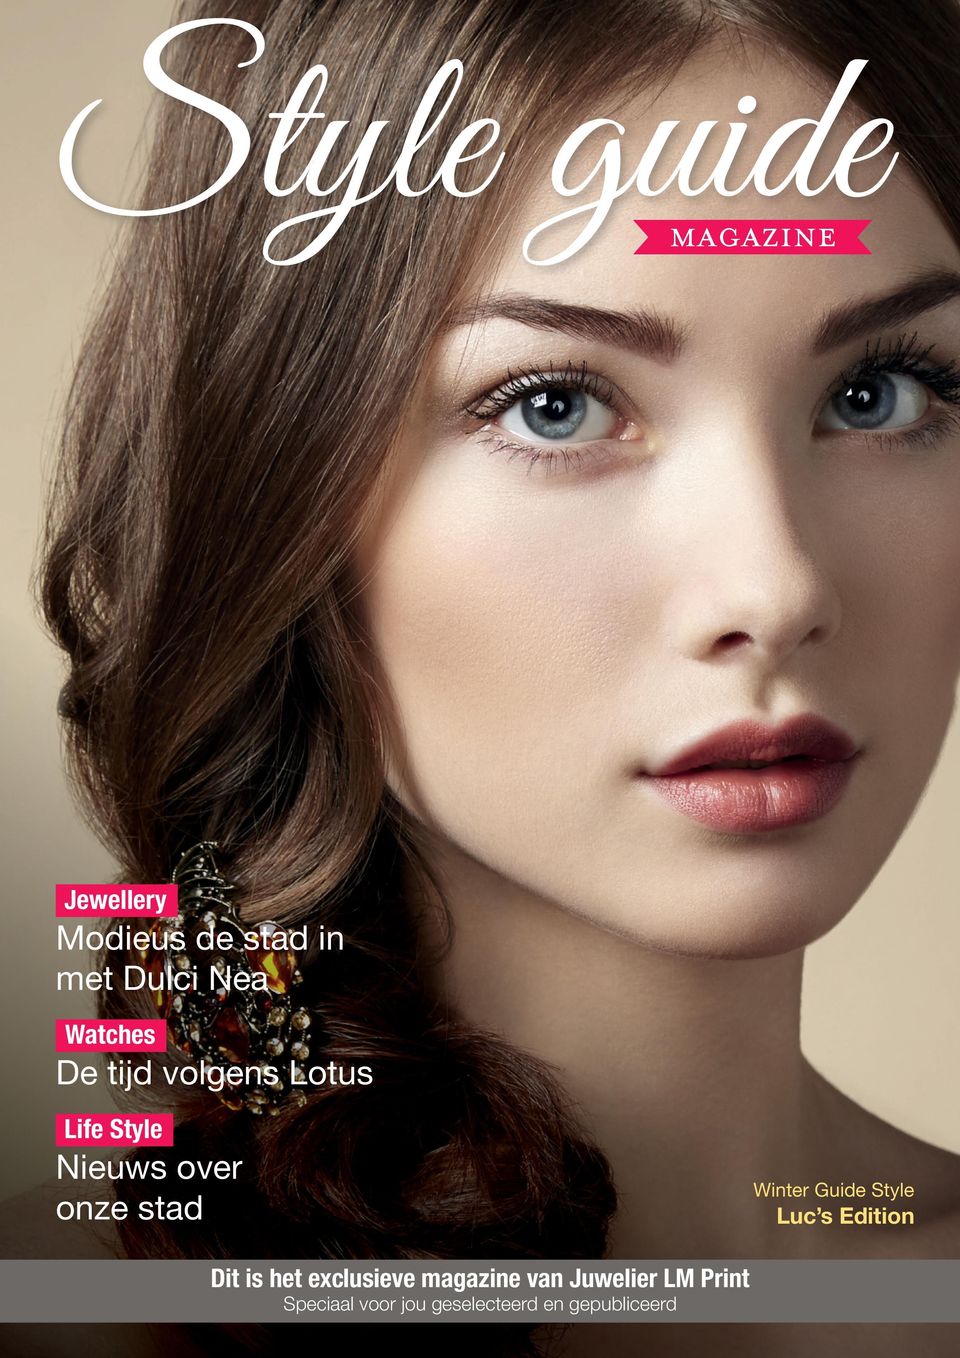 Winter Guide Style Luc s Edition Dit is het exclusieve magazine